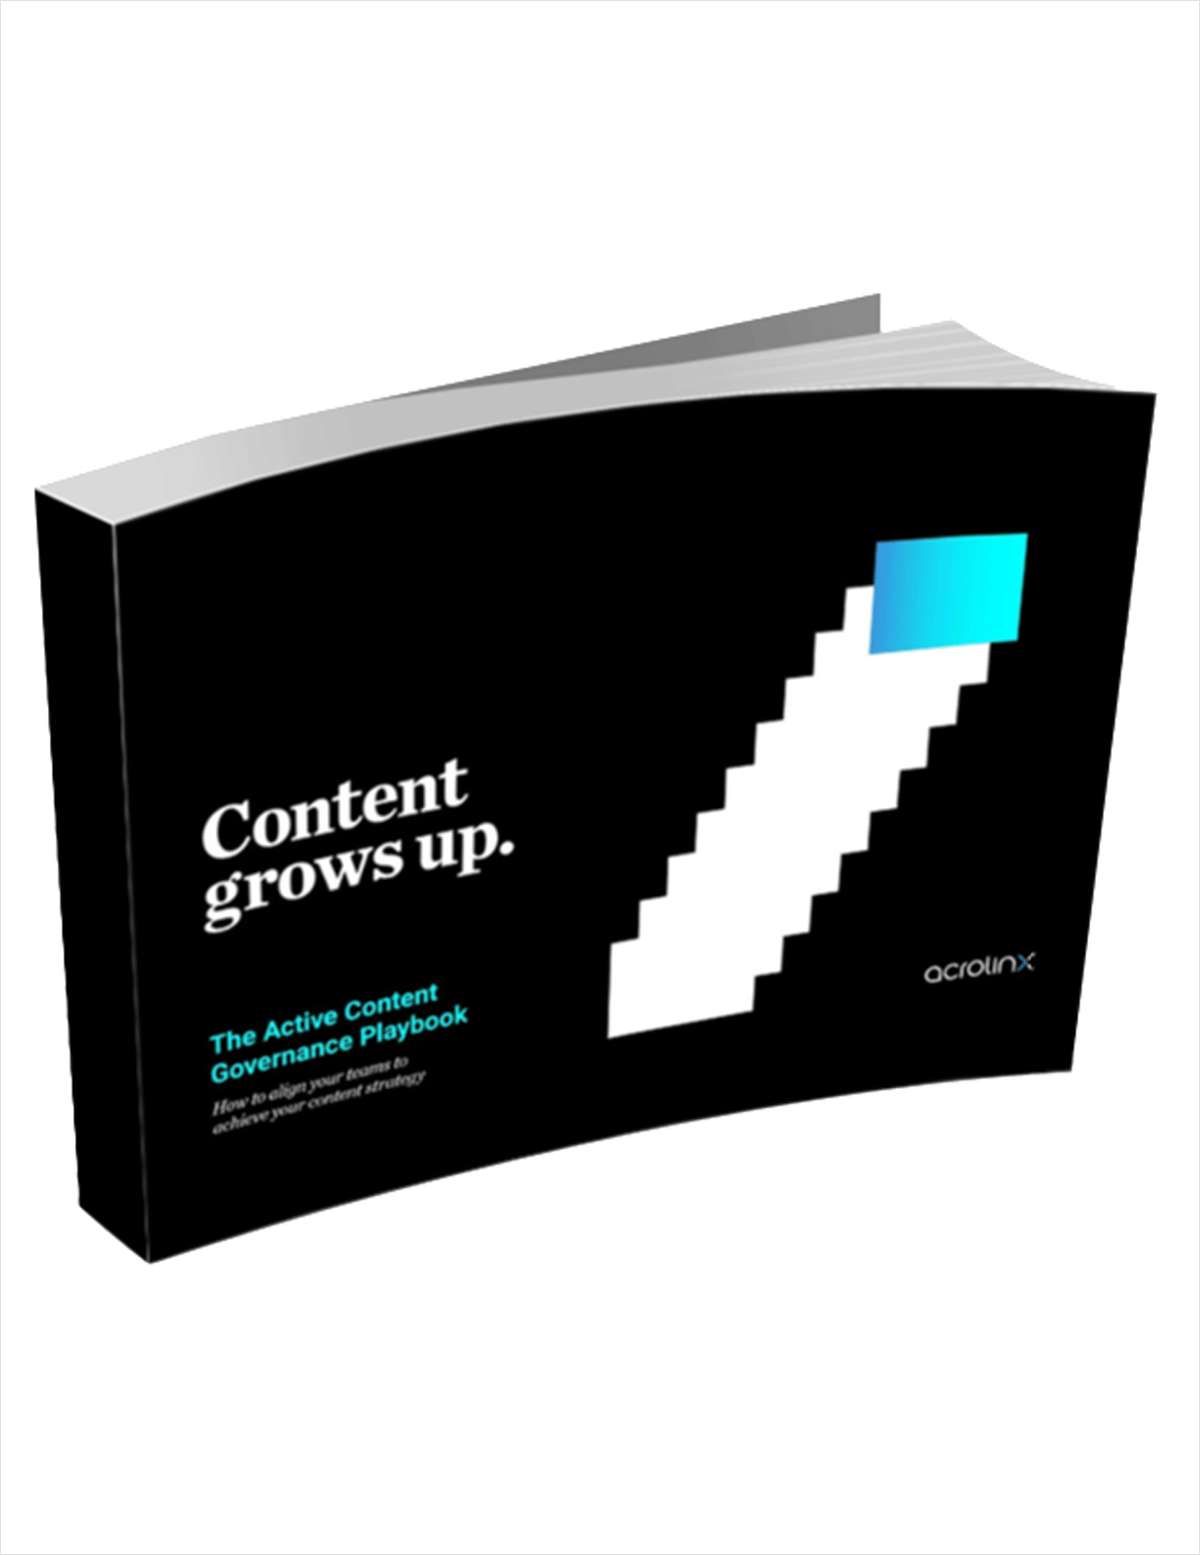 Content Grows Up: How to Align Your Teams to Achieve Your Content Strategy